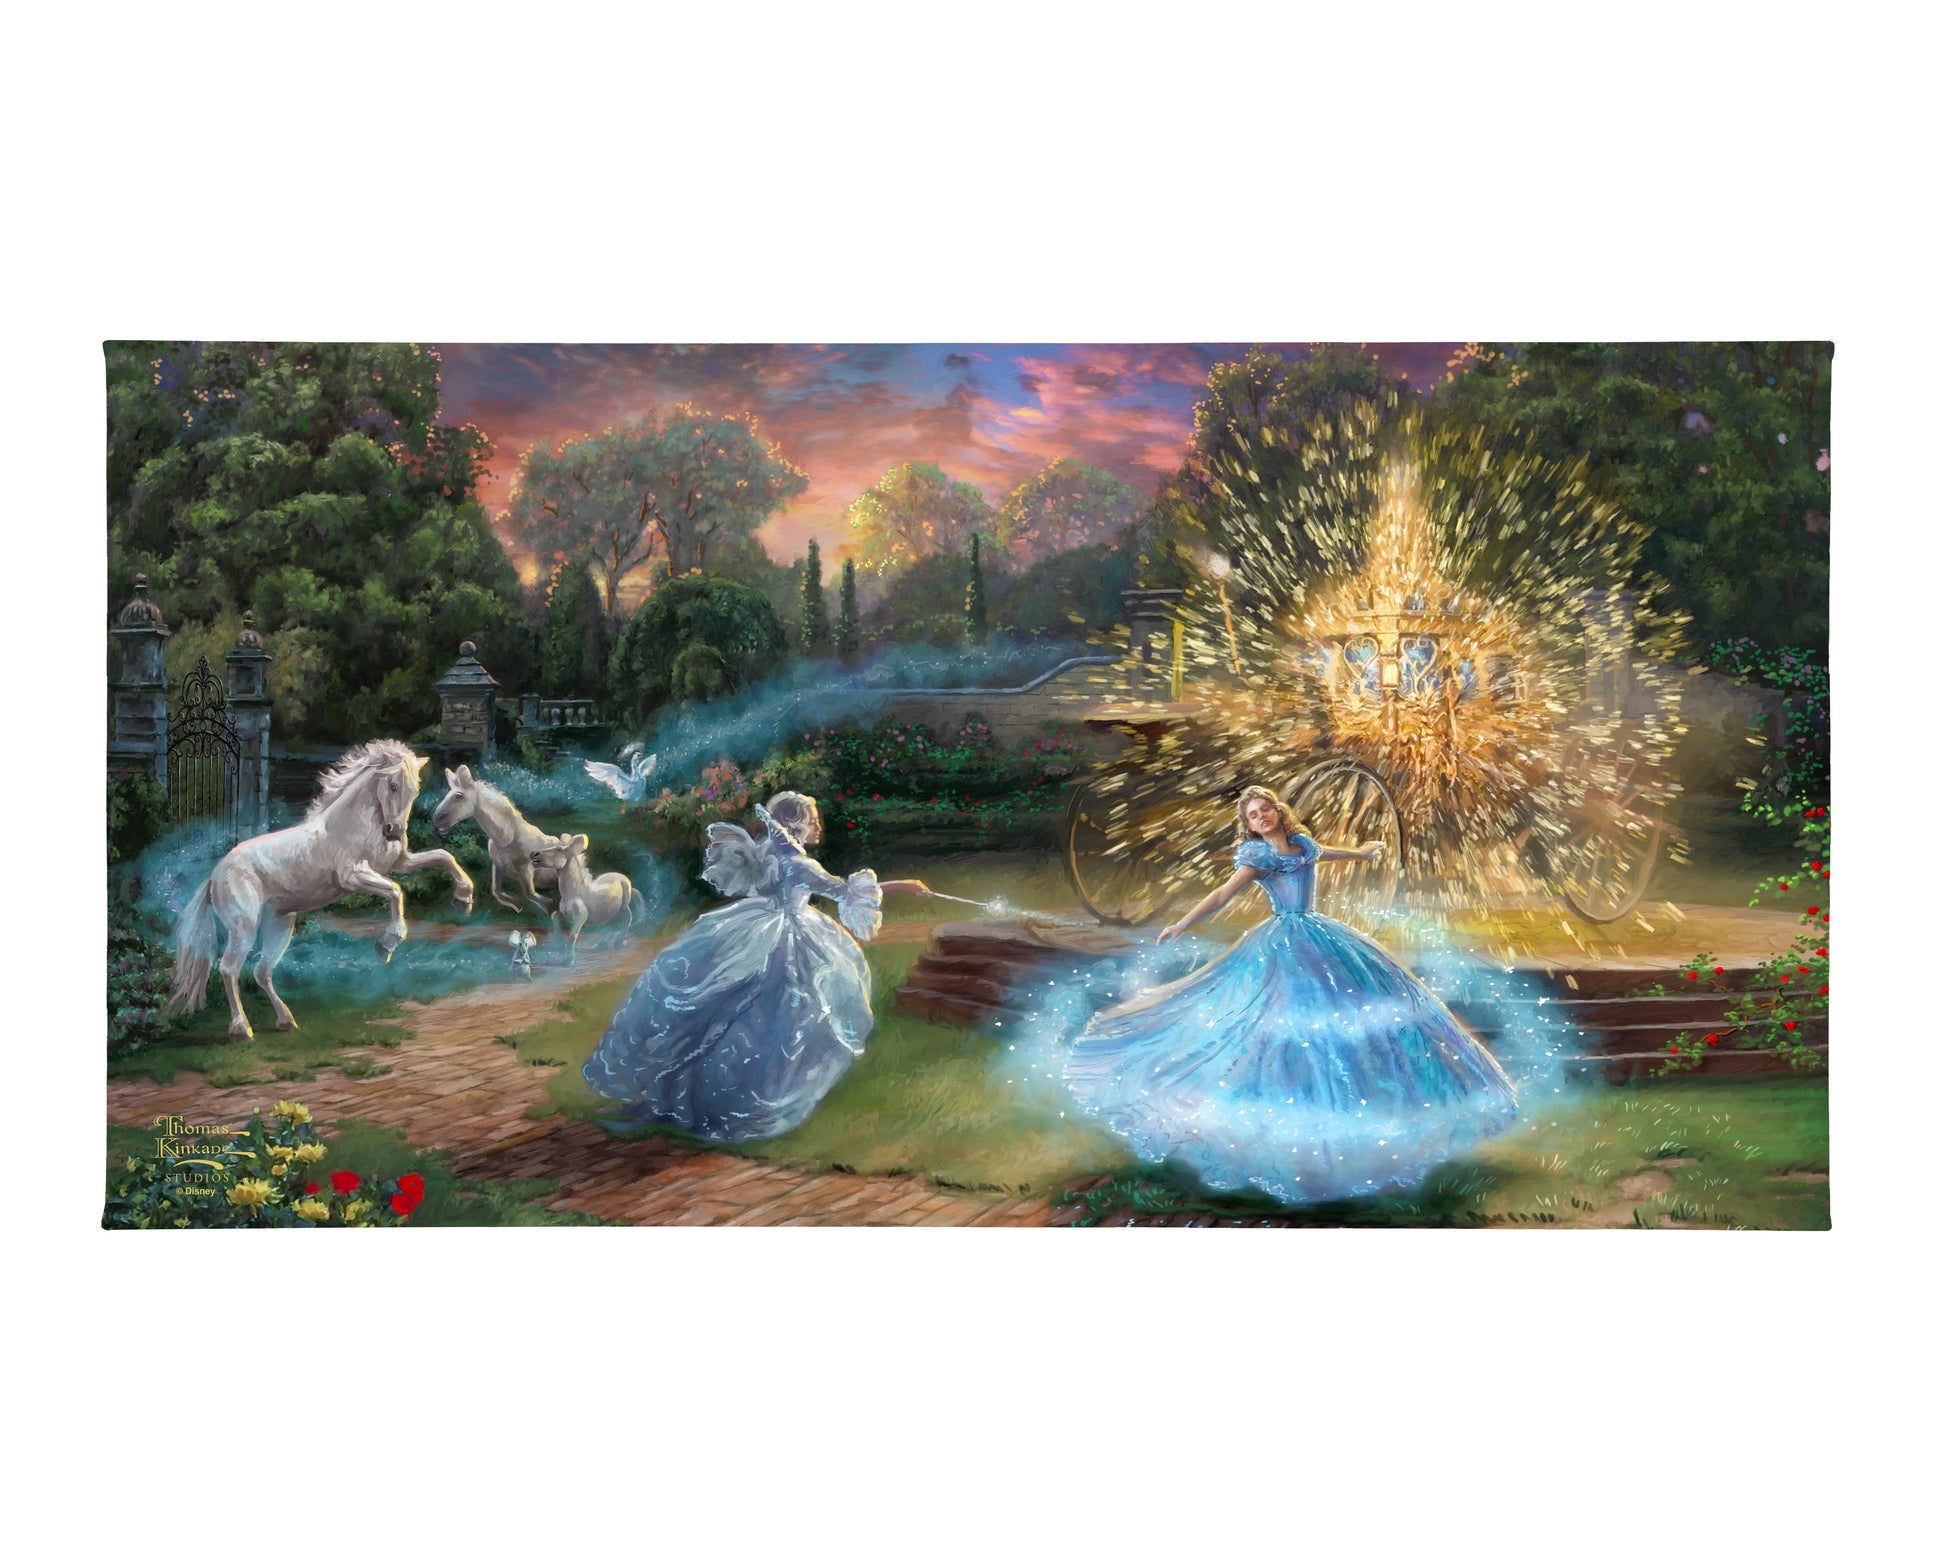 The fairy godmother grants Cinderella her wish, an enchanted transformation, her flight from discovery at the King's ball, or her time in love with the prince of her dreams.